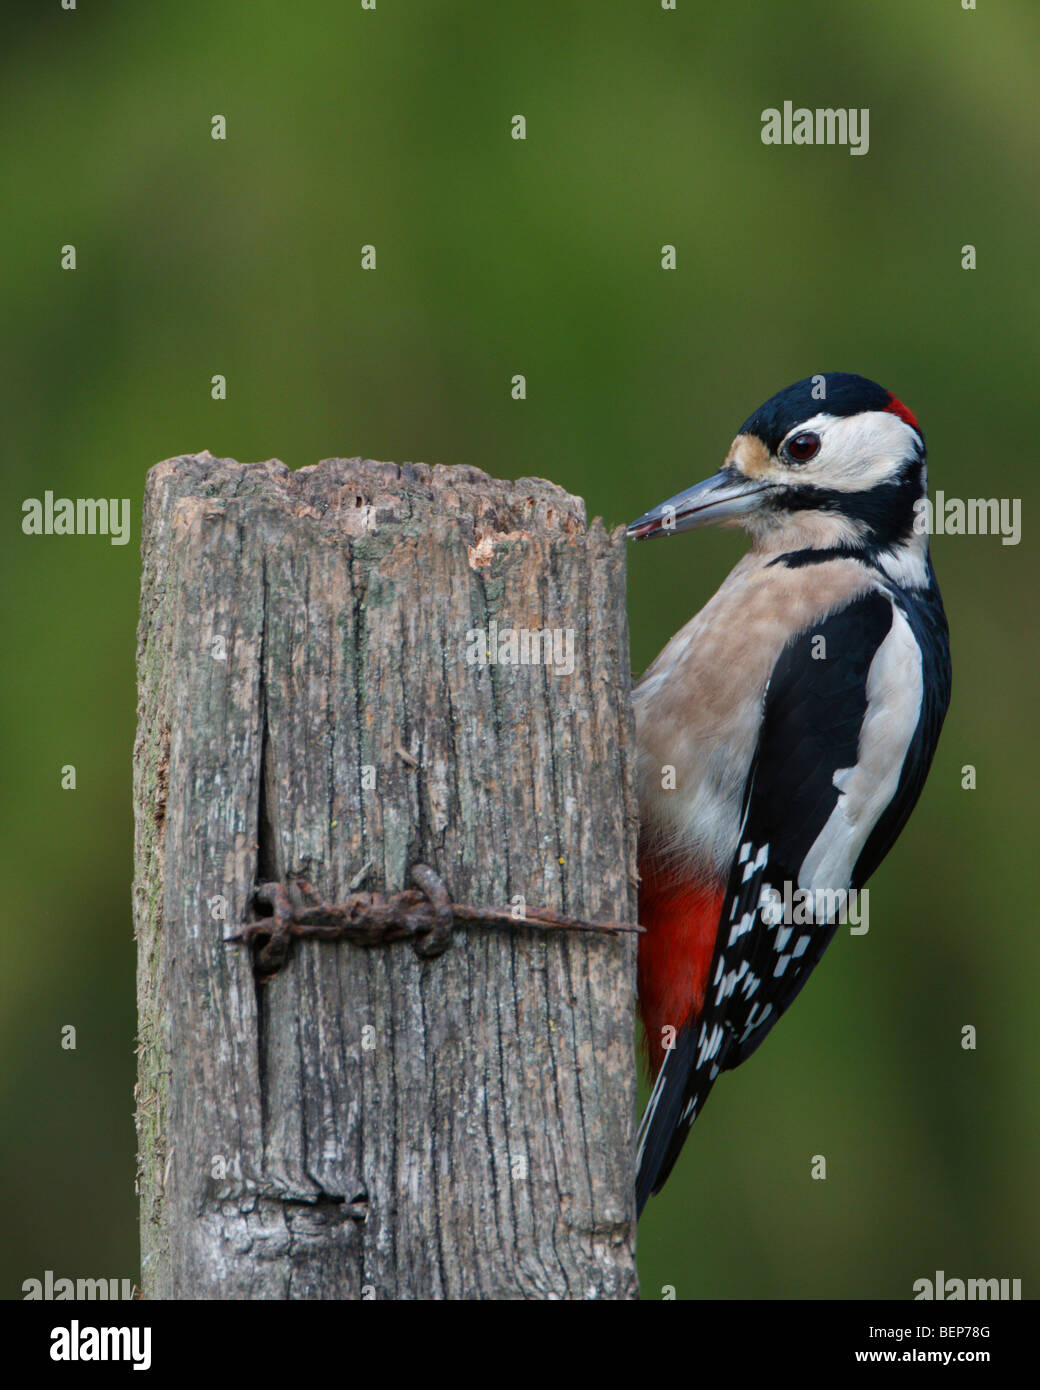 Great spotted woodpecker Dendrocopos major Banque D'Images